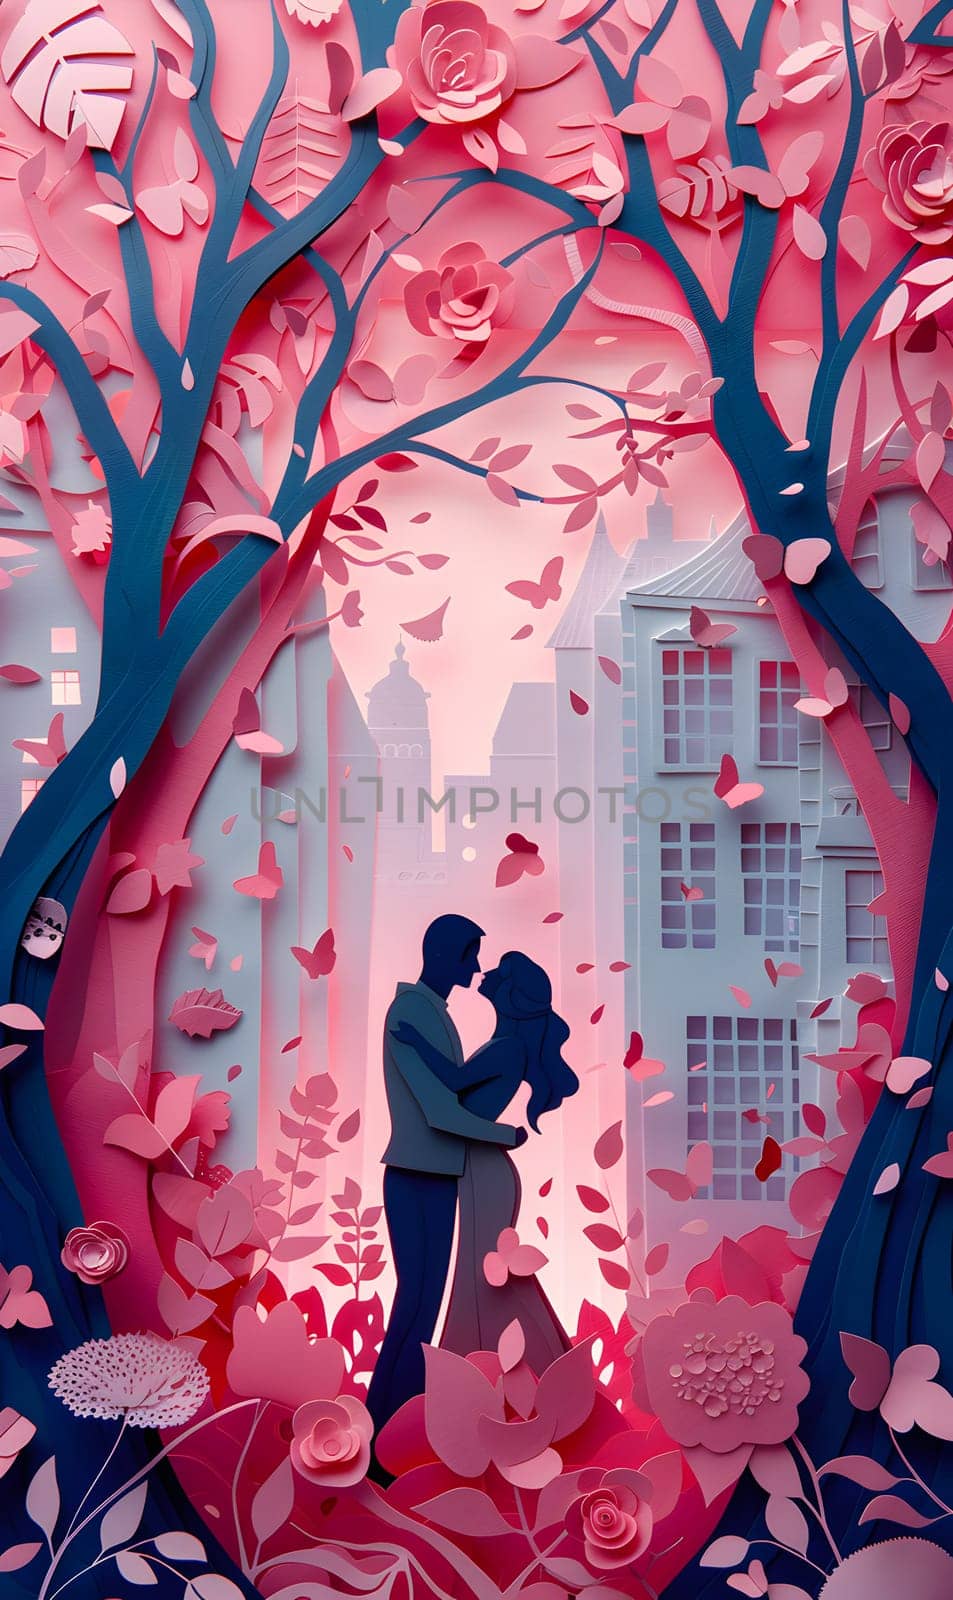 A couple is embracing under a blooming tree, with pink and red flowers all around them. Their intimate gesture blends with natures beauty